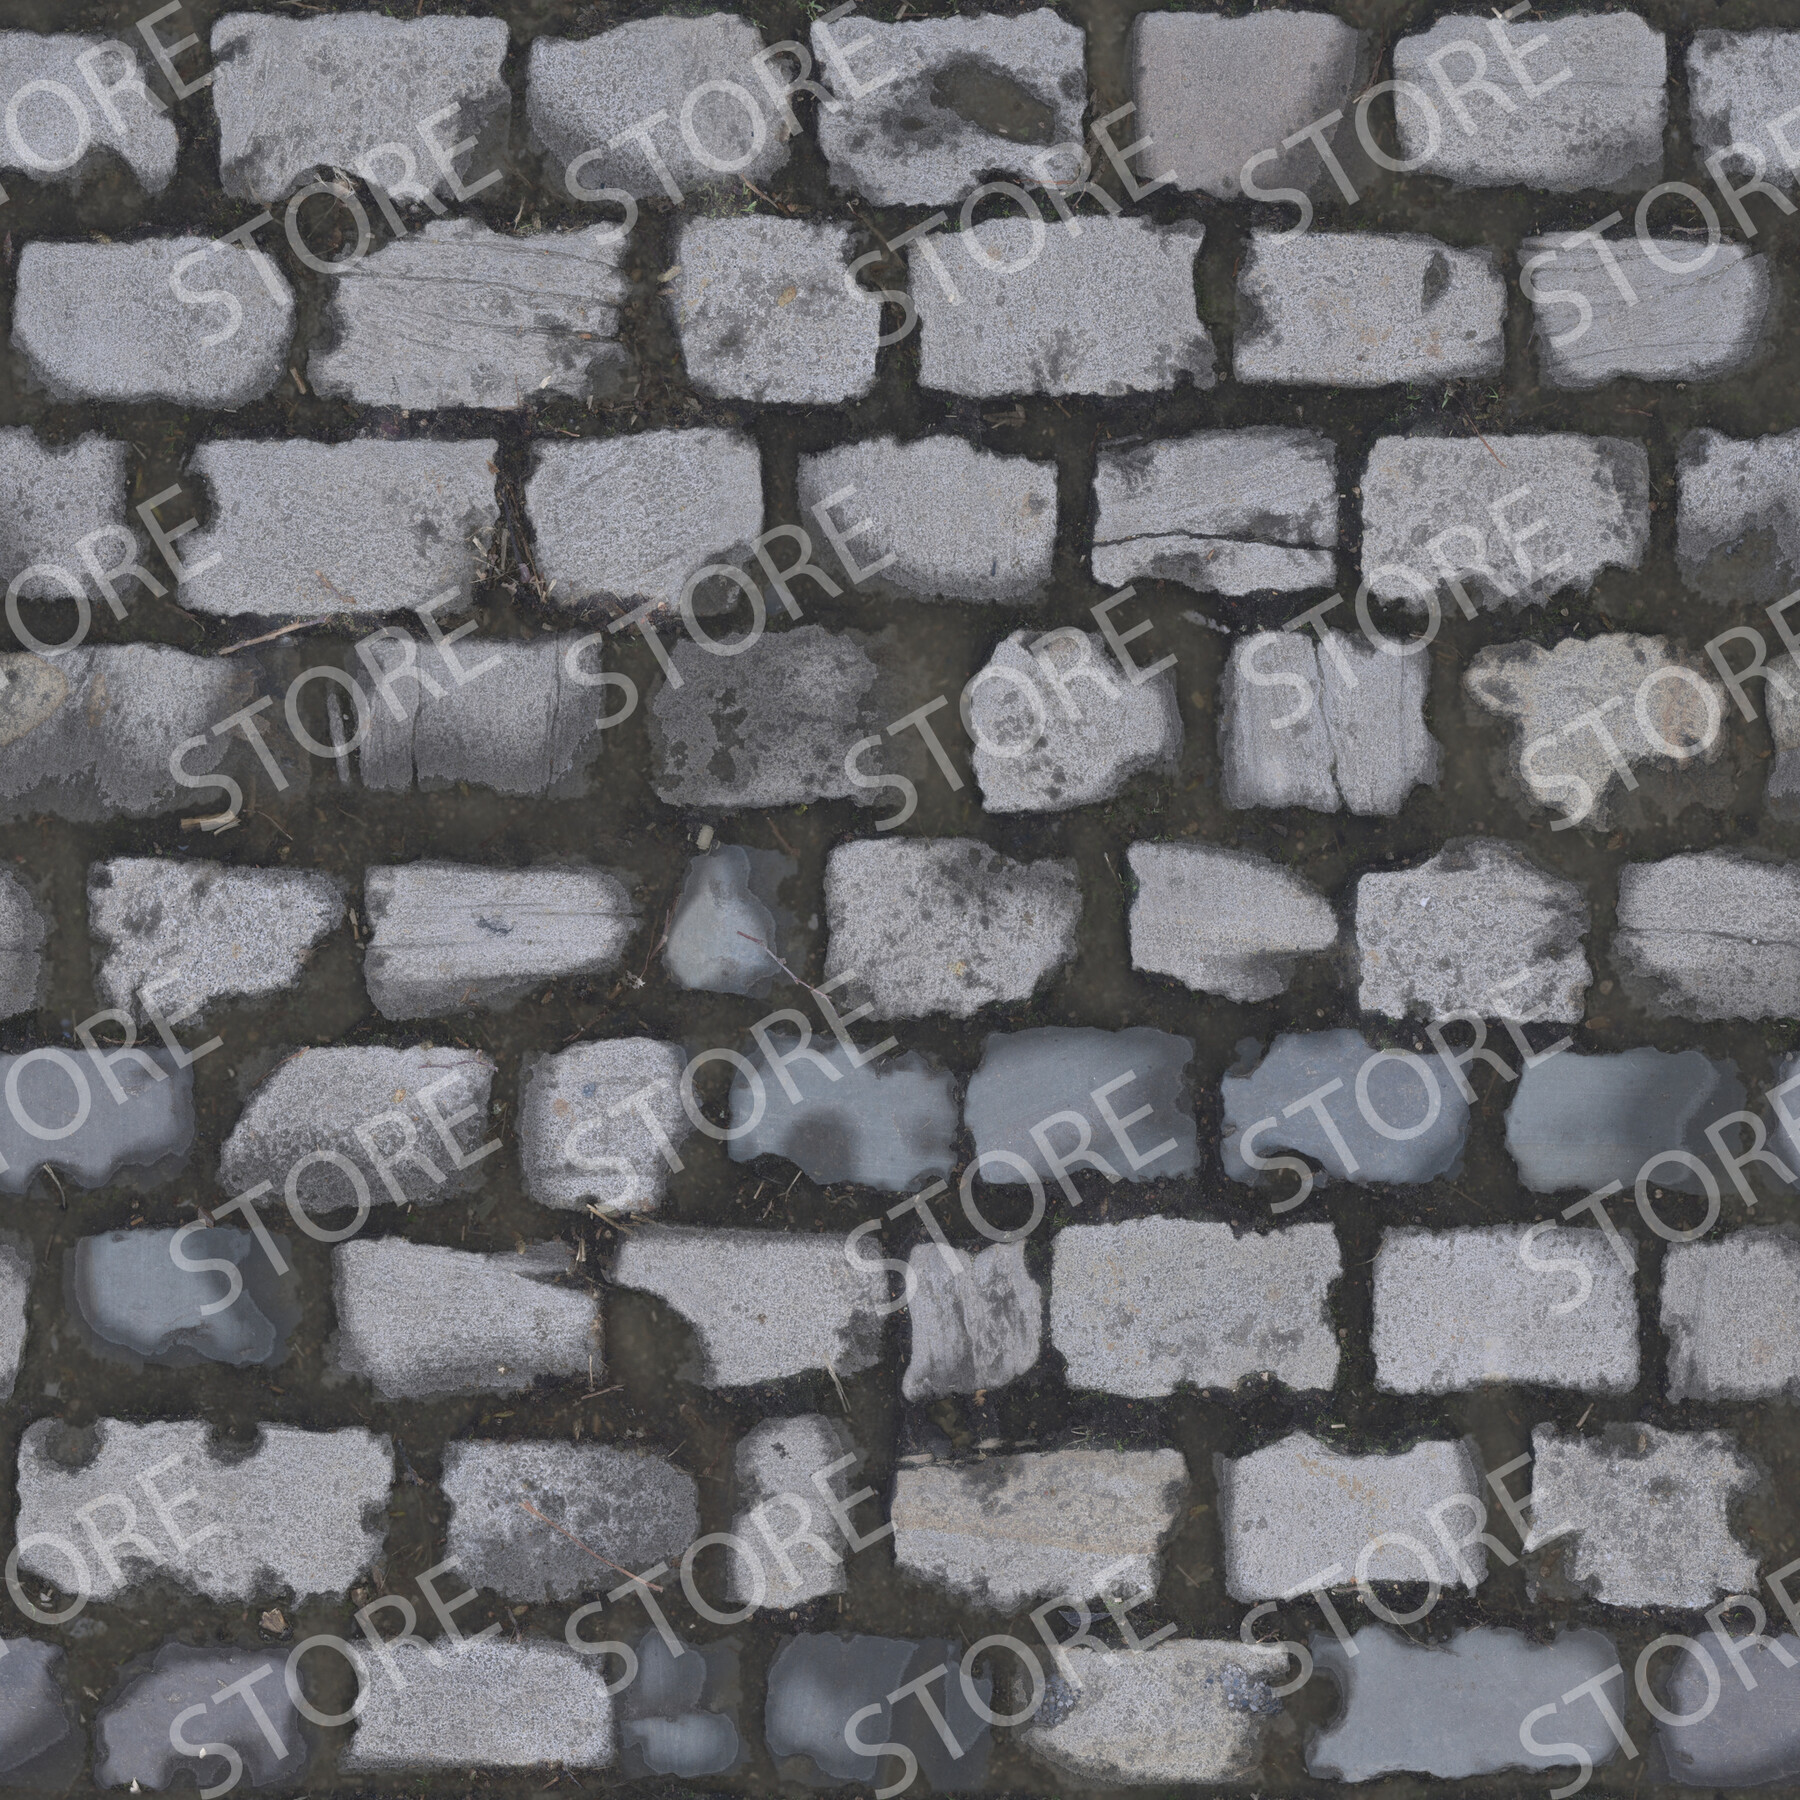 ArtStation - Bricks Seamless Texture Patterns 2k (2048*2048), PNG 10, JPG  10 File Formats All Texture Apply After Object Look Like A 3D